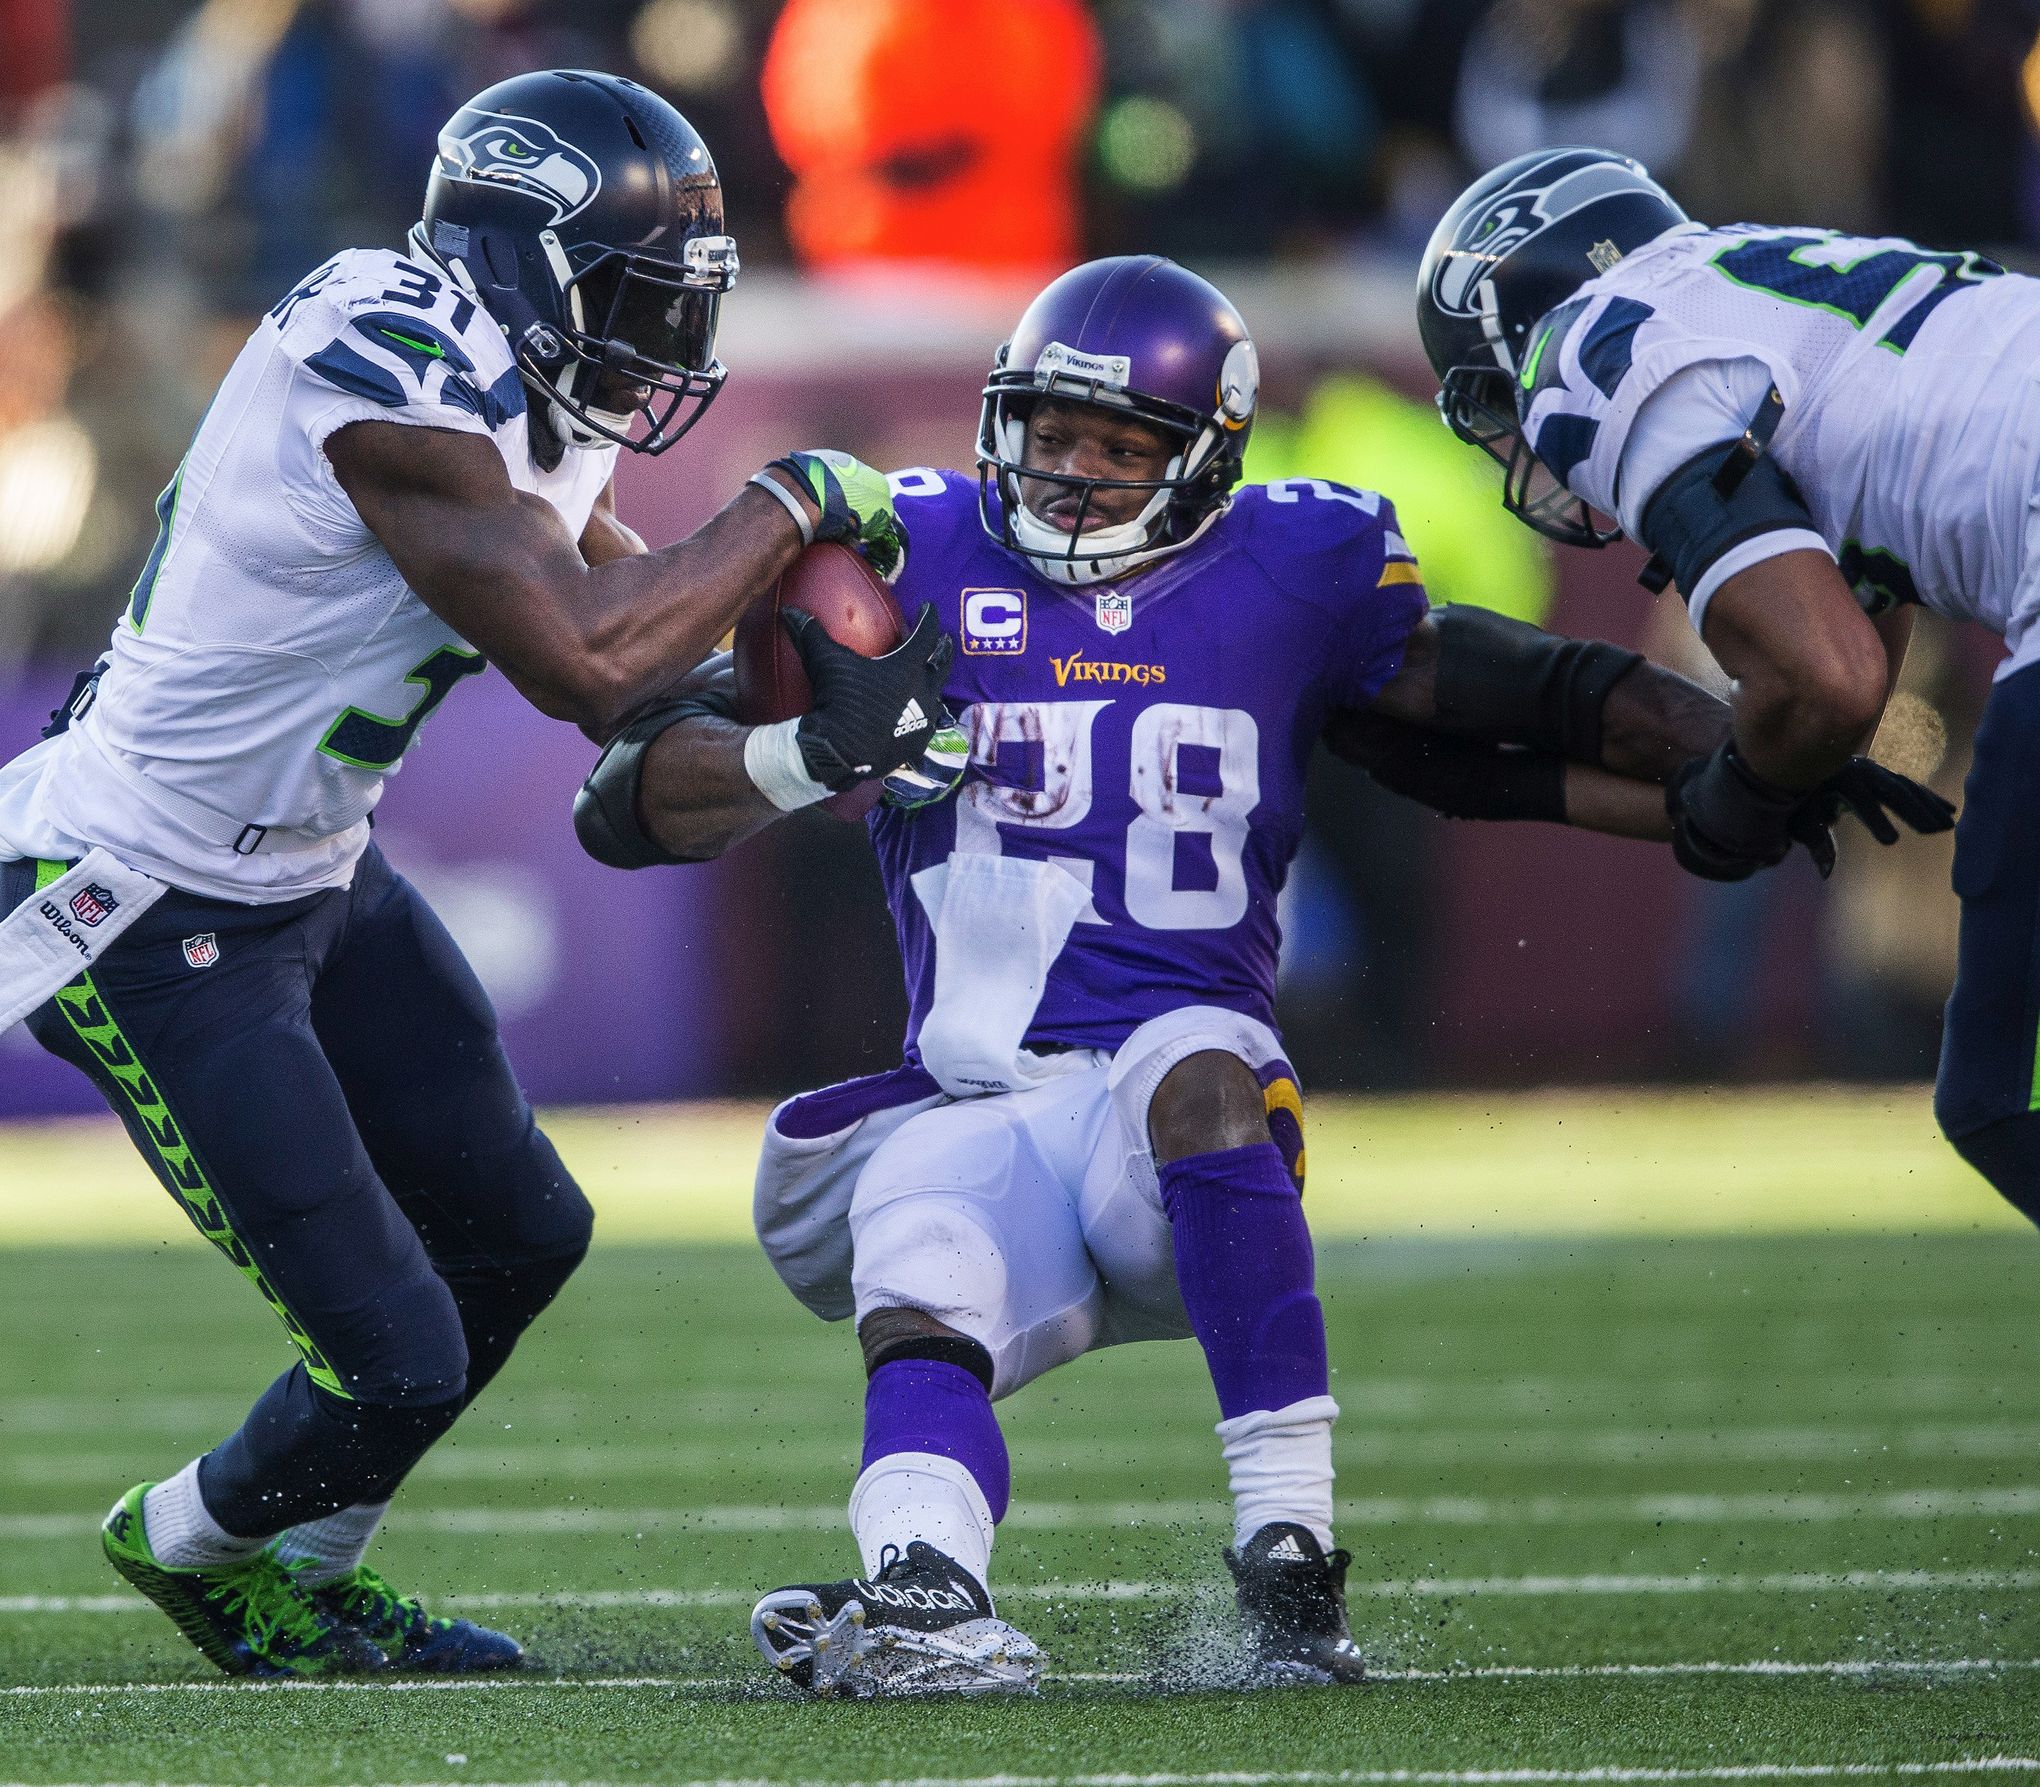 Seahawks escape with 10-9 win over Vikings after missed kick